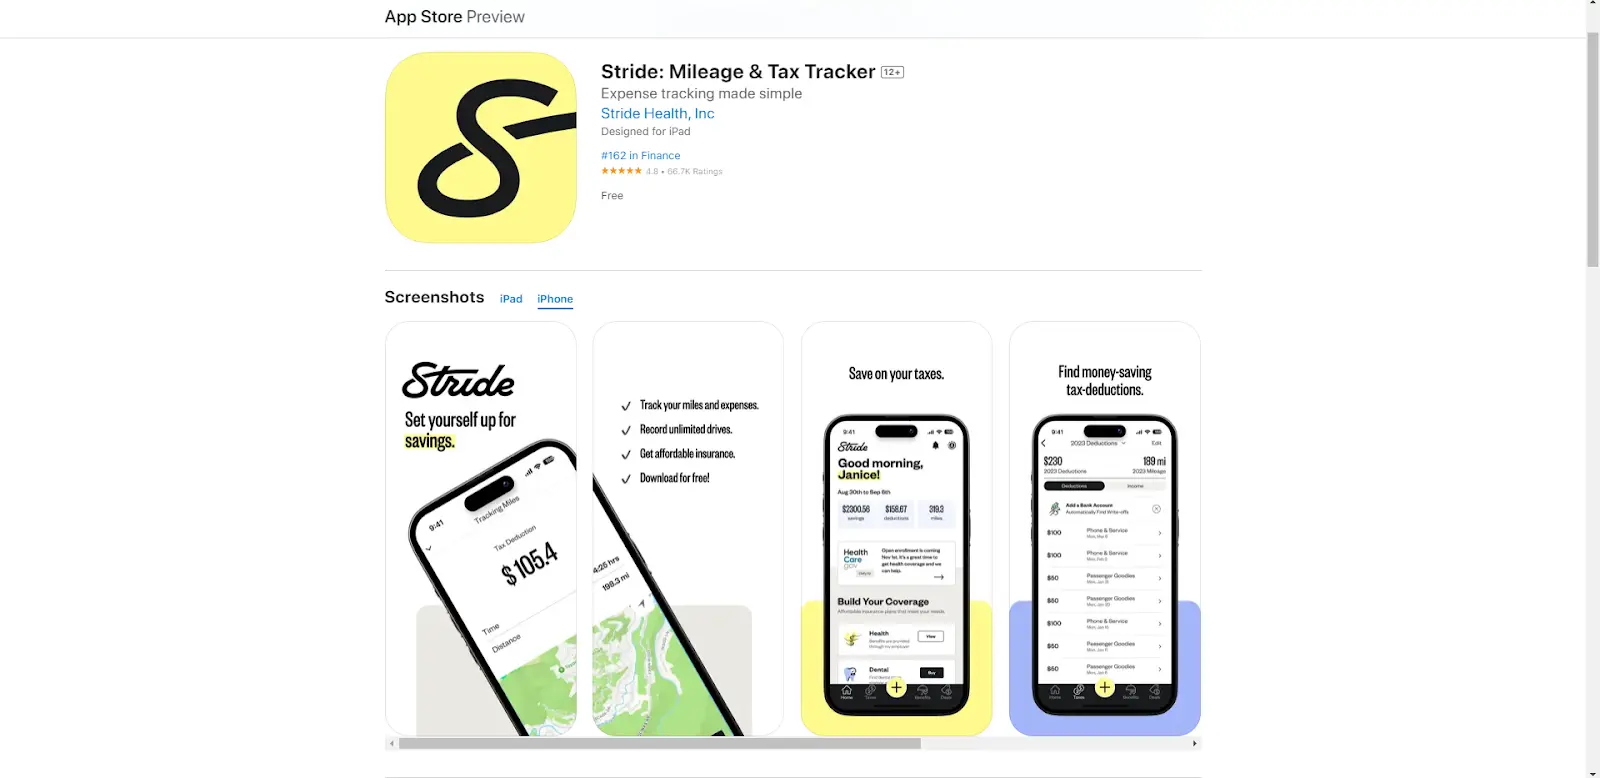 Stride is one of the best free apps for rideshare drivers